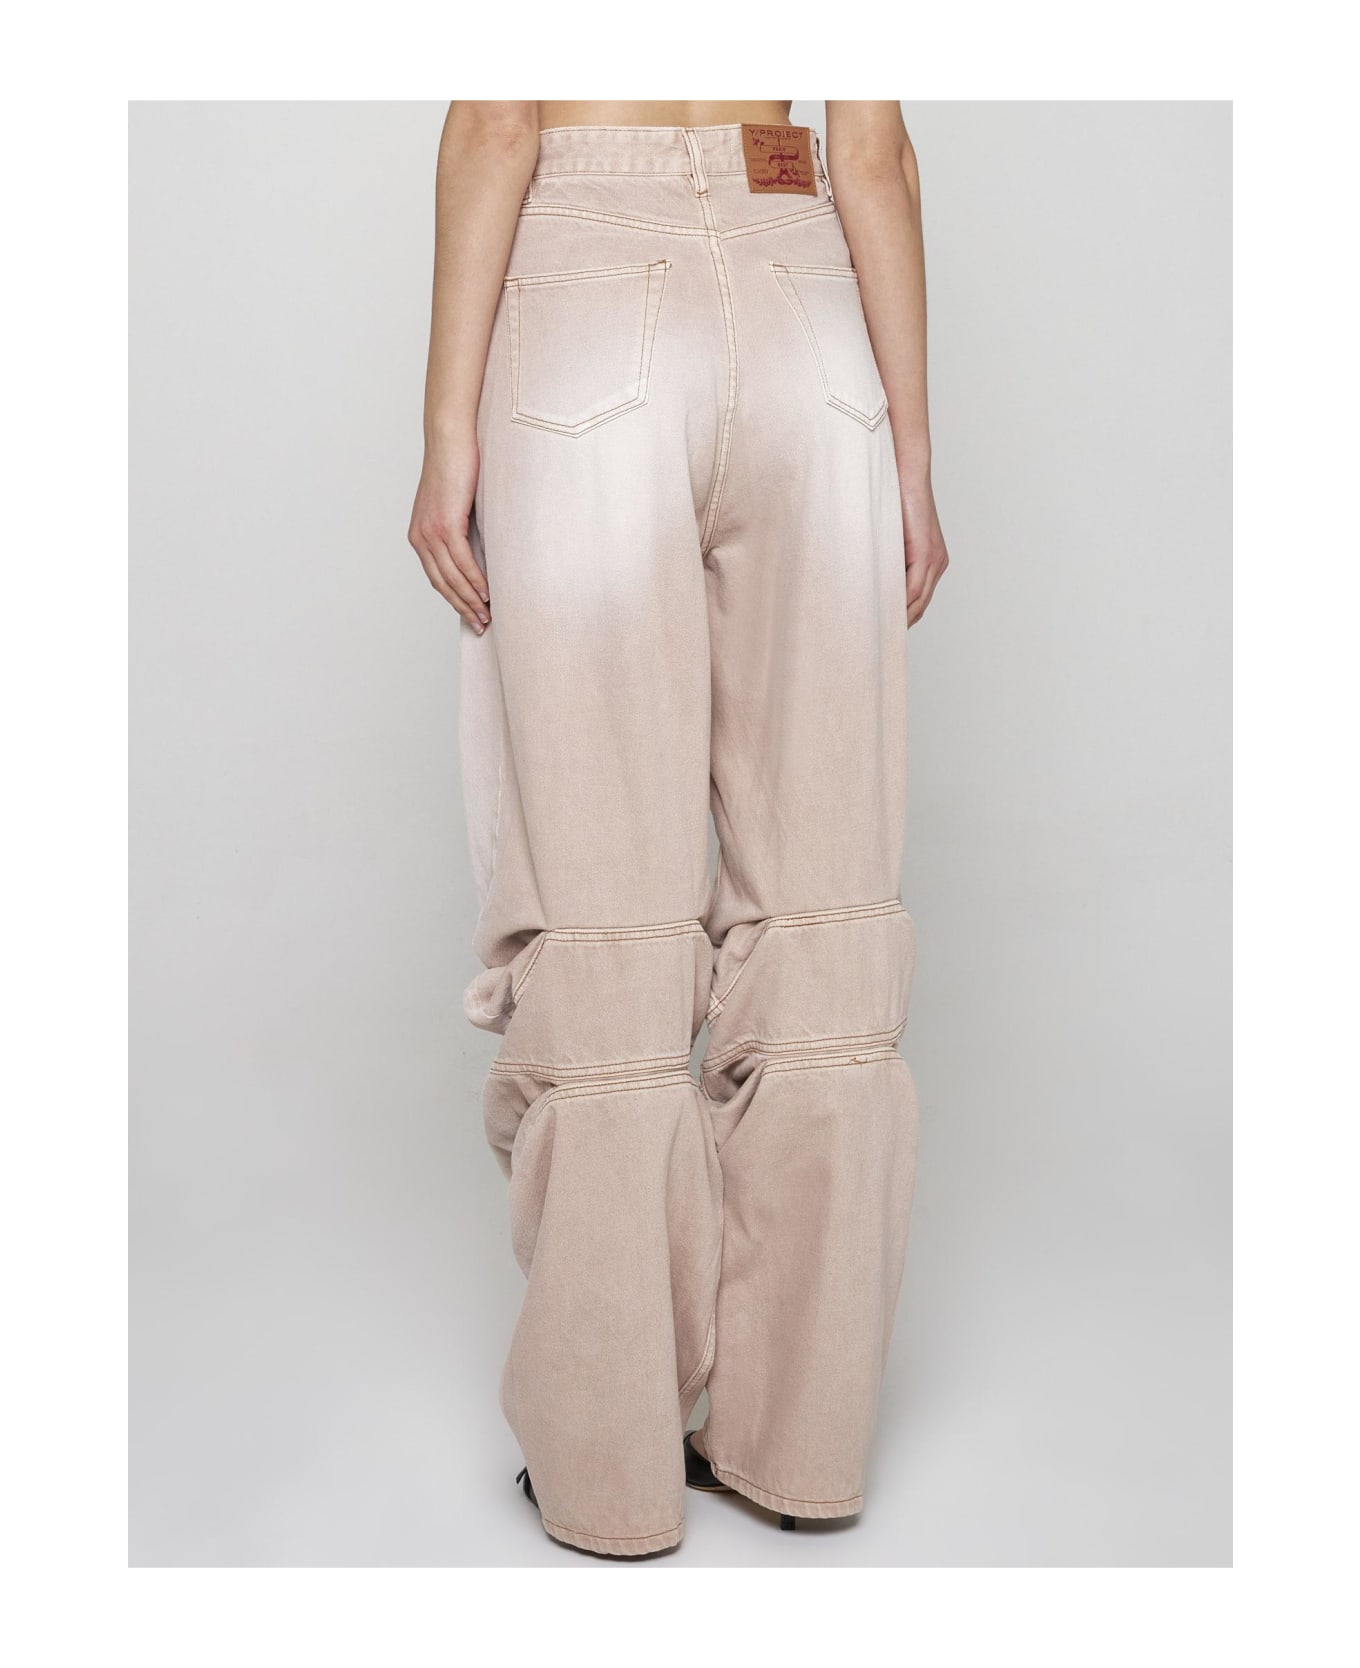 Y/Project Draped Cuff Jeans - Pink デニム